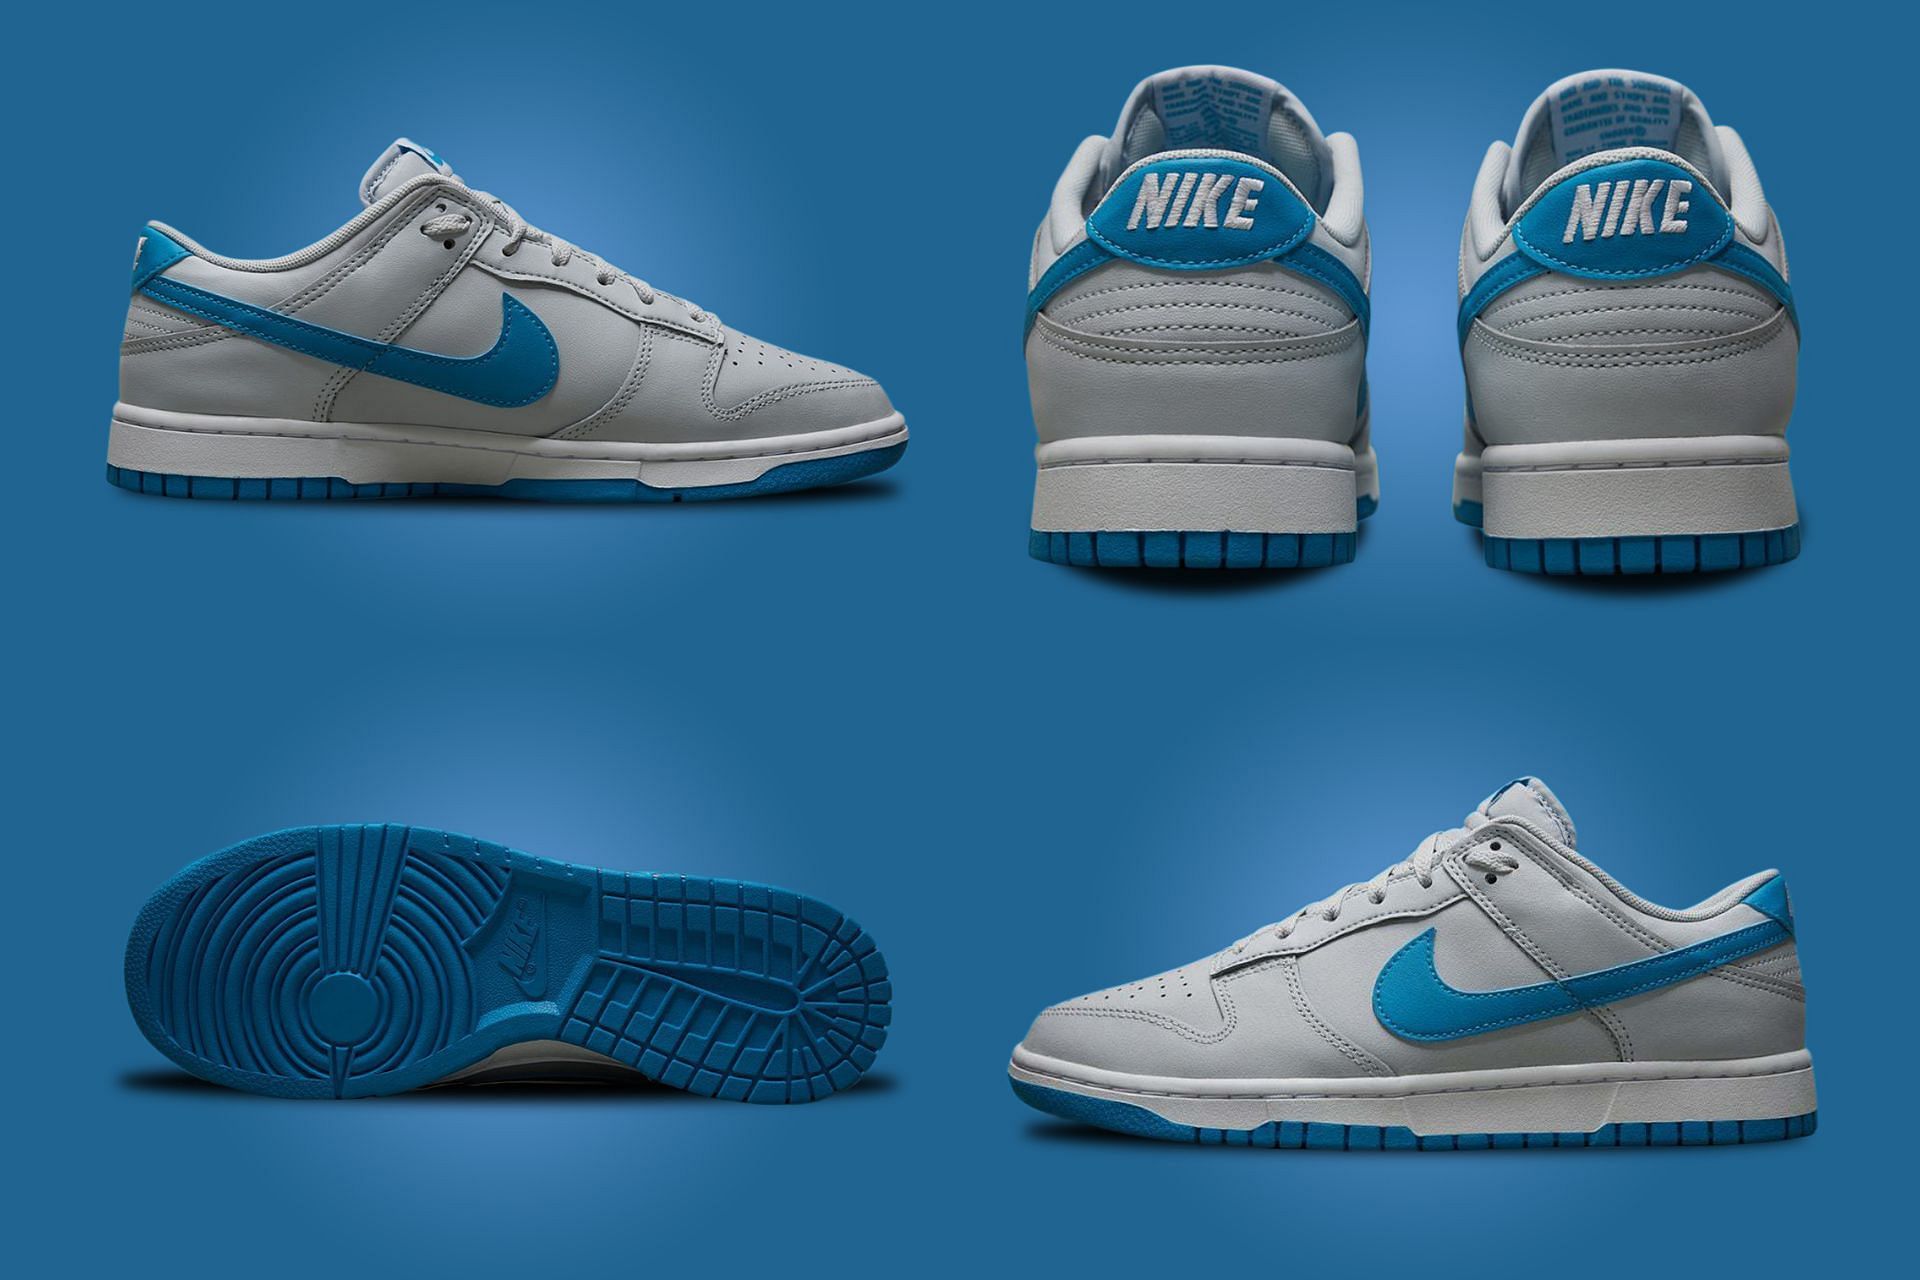 The upcoming Nike Dunk Low &quot;Grey Blue&quot; sneakers come clad in Light Bone and Light Blue hues (Image via Sportskeeda)